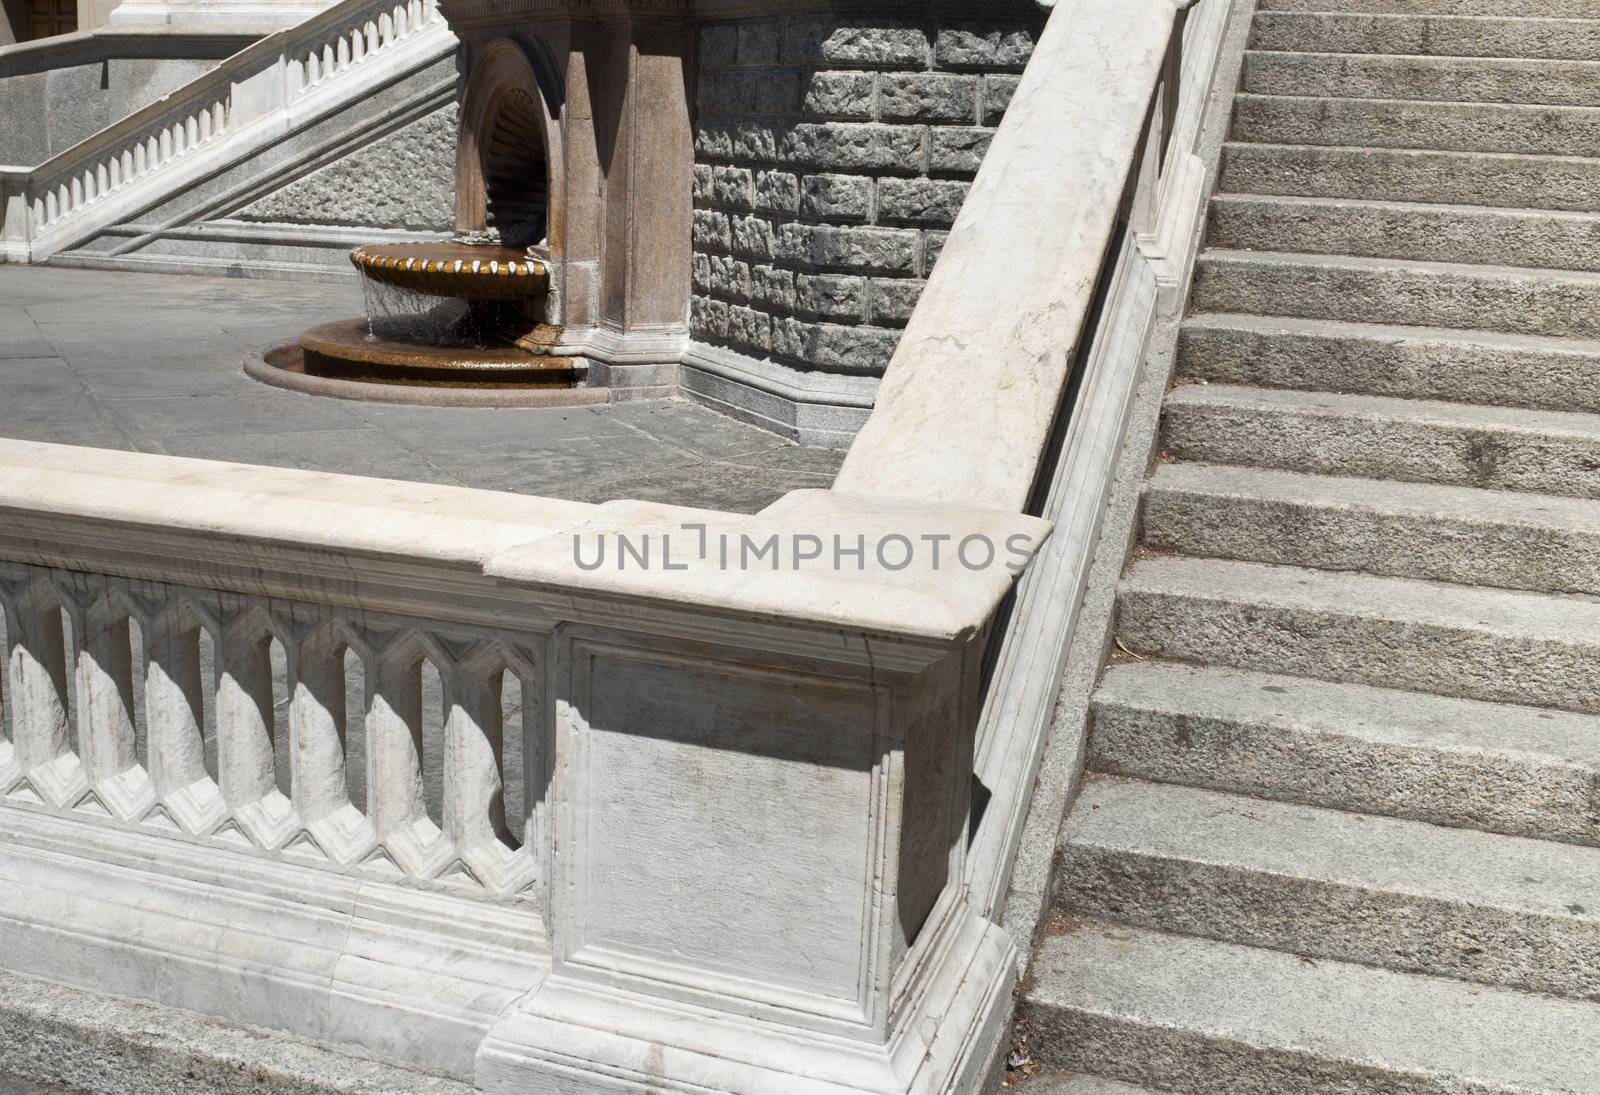 Hot water fountain from little town in Italy, Acqui Terme